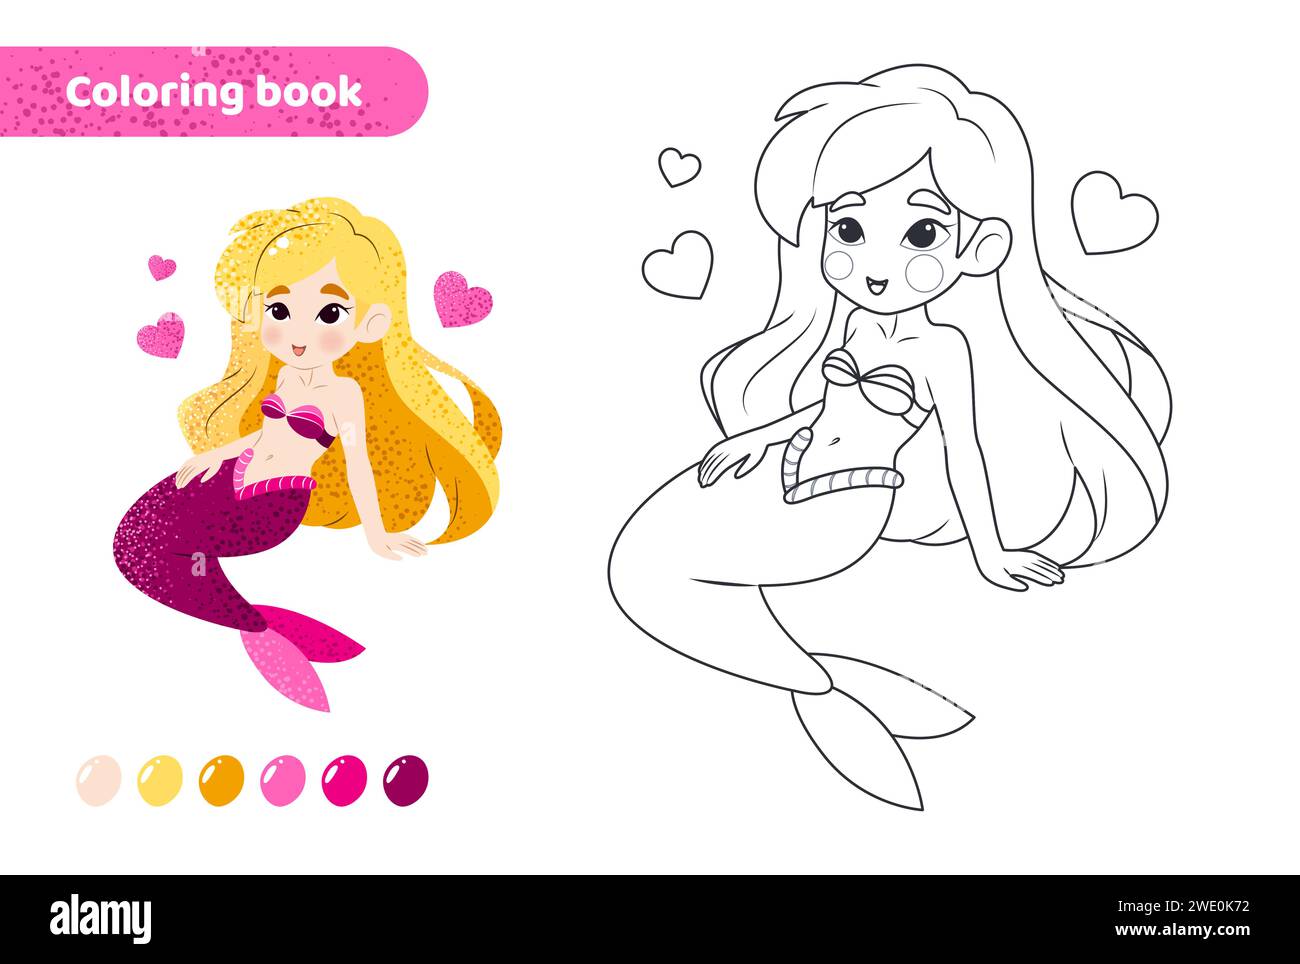 Coloring book for kids. Cute mermaid with hearts. Stock Vector